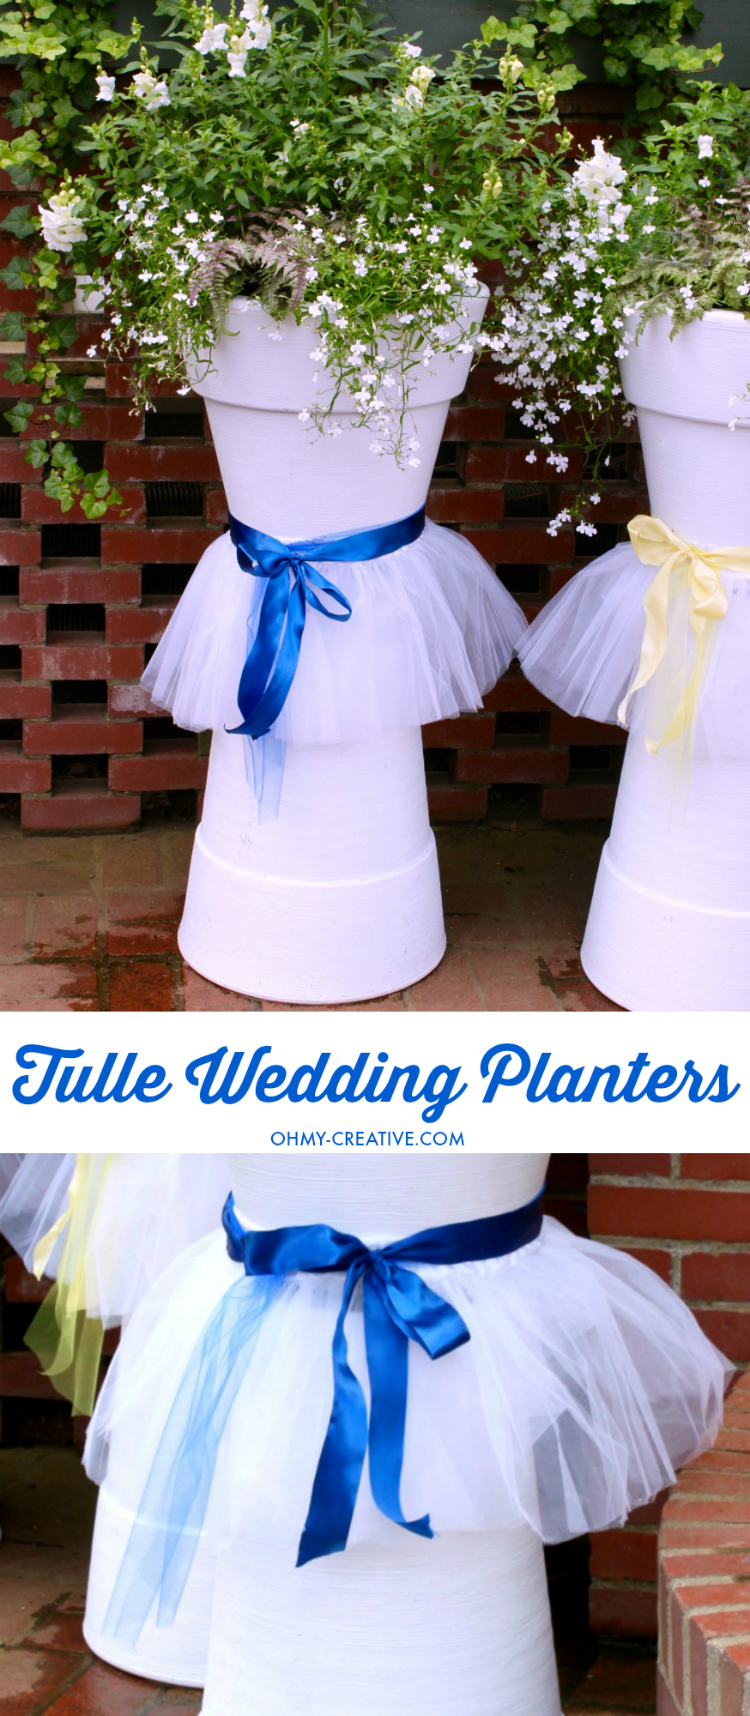 How adorable are these Tulle DIY Wedding Flower Pots for Weddings, Bridal Showers or other Spring or Summer events! Easy to make with white painted flower pots, ribbon and tulle! A great tulle tutu planter! | OHMY-CREATIVE.COM